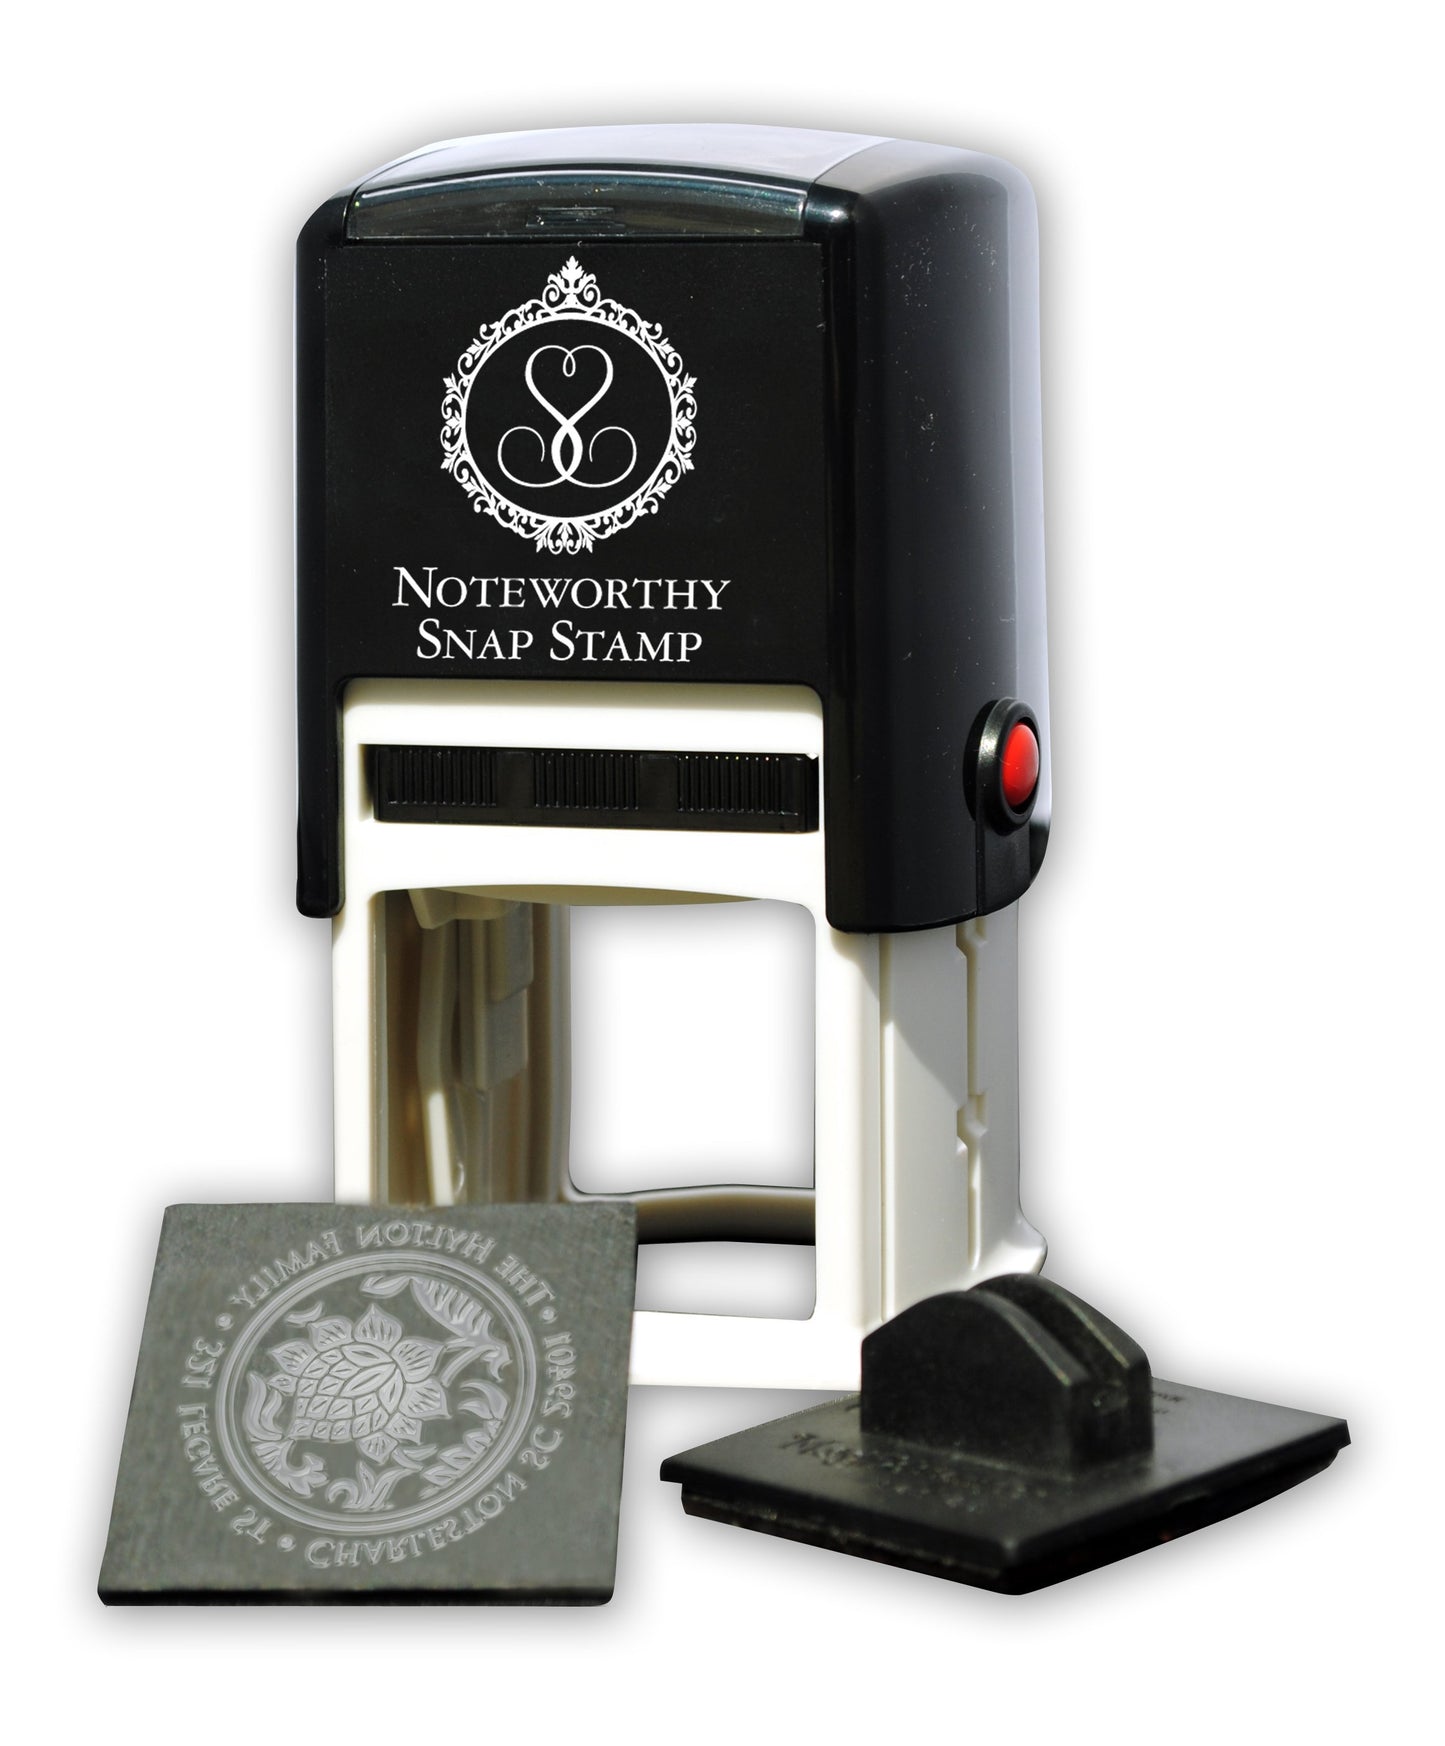 Capital of New Hampshire Square Stamper or Embosser